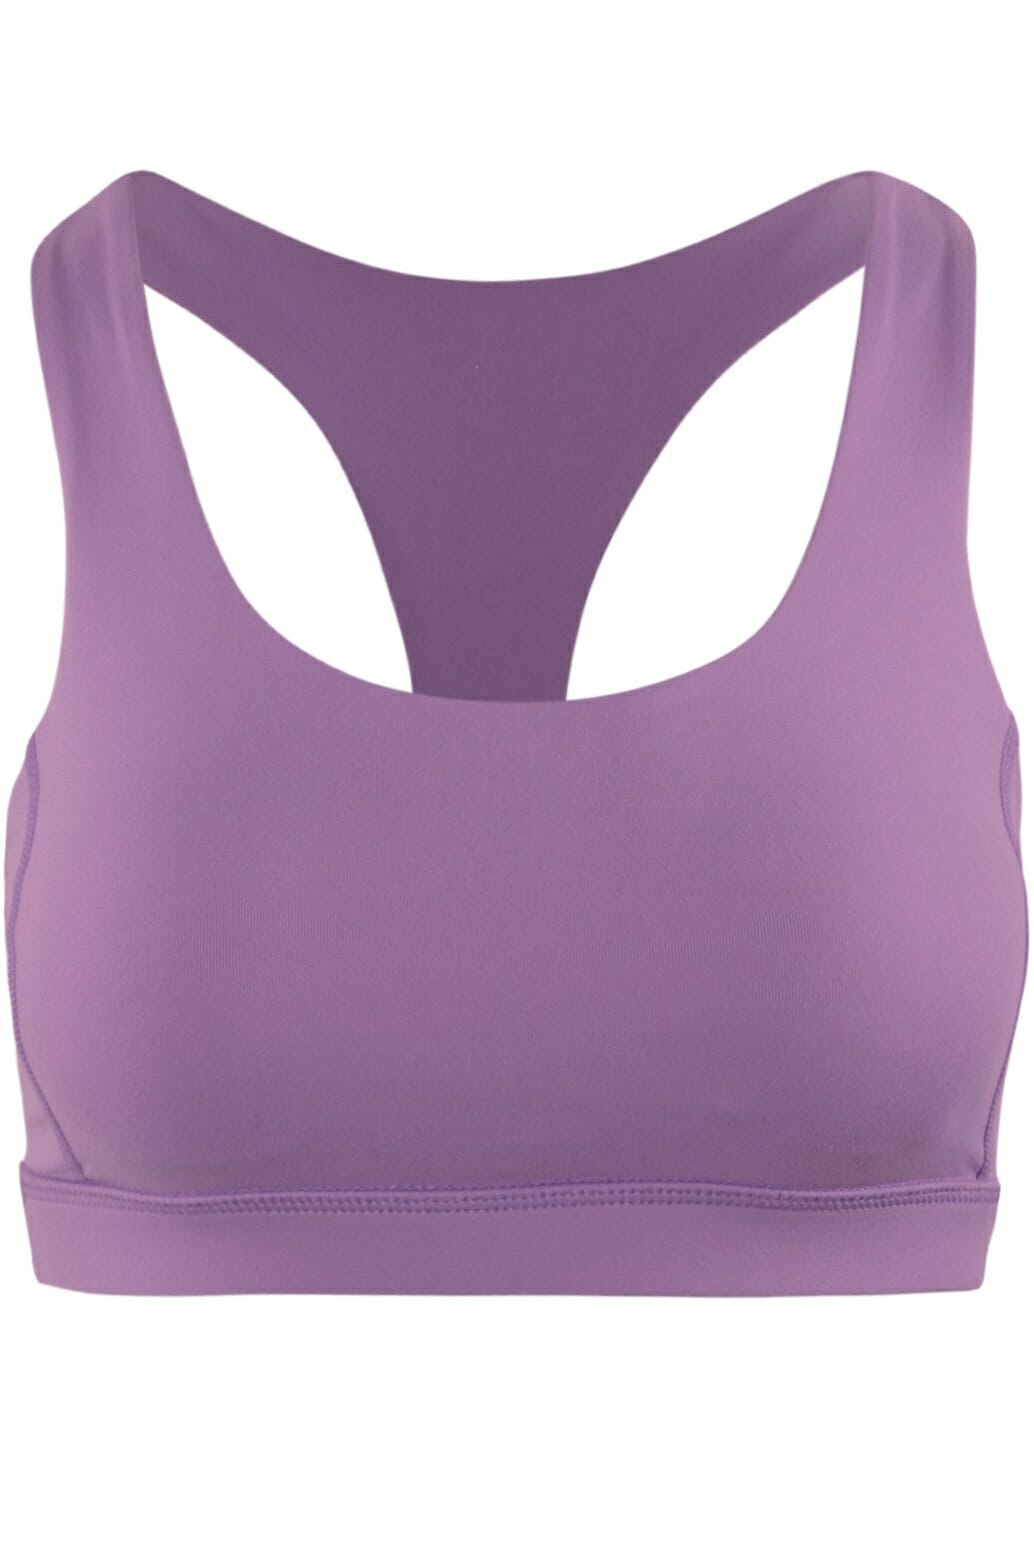 Racerback DLX Sports Bra in Black color by Chandra Yoga & Active Wear